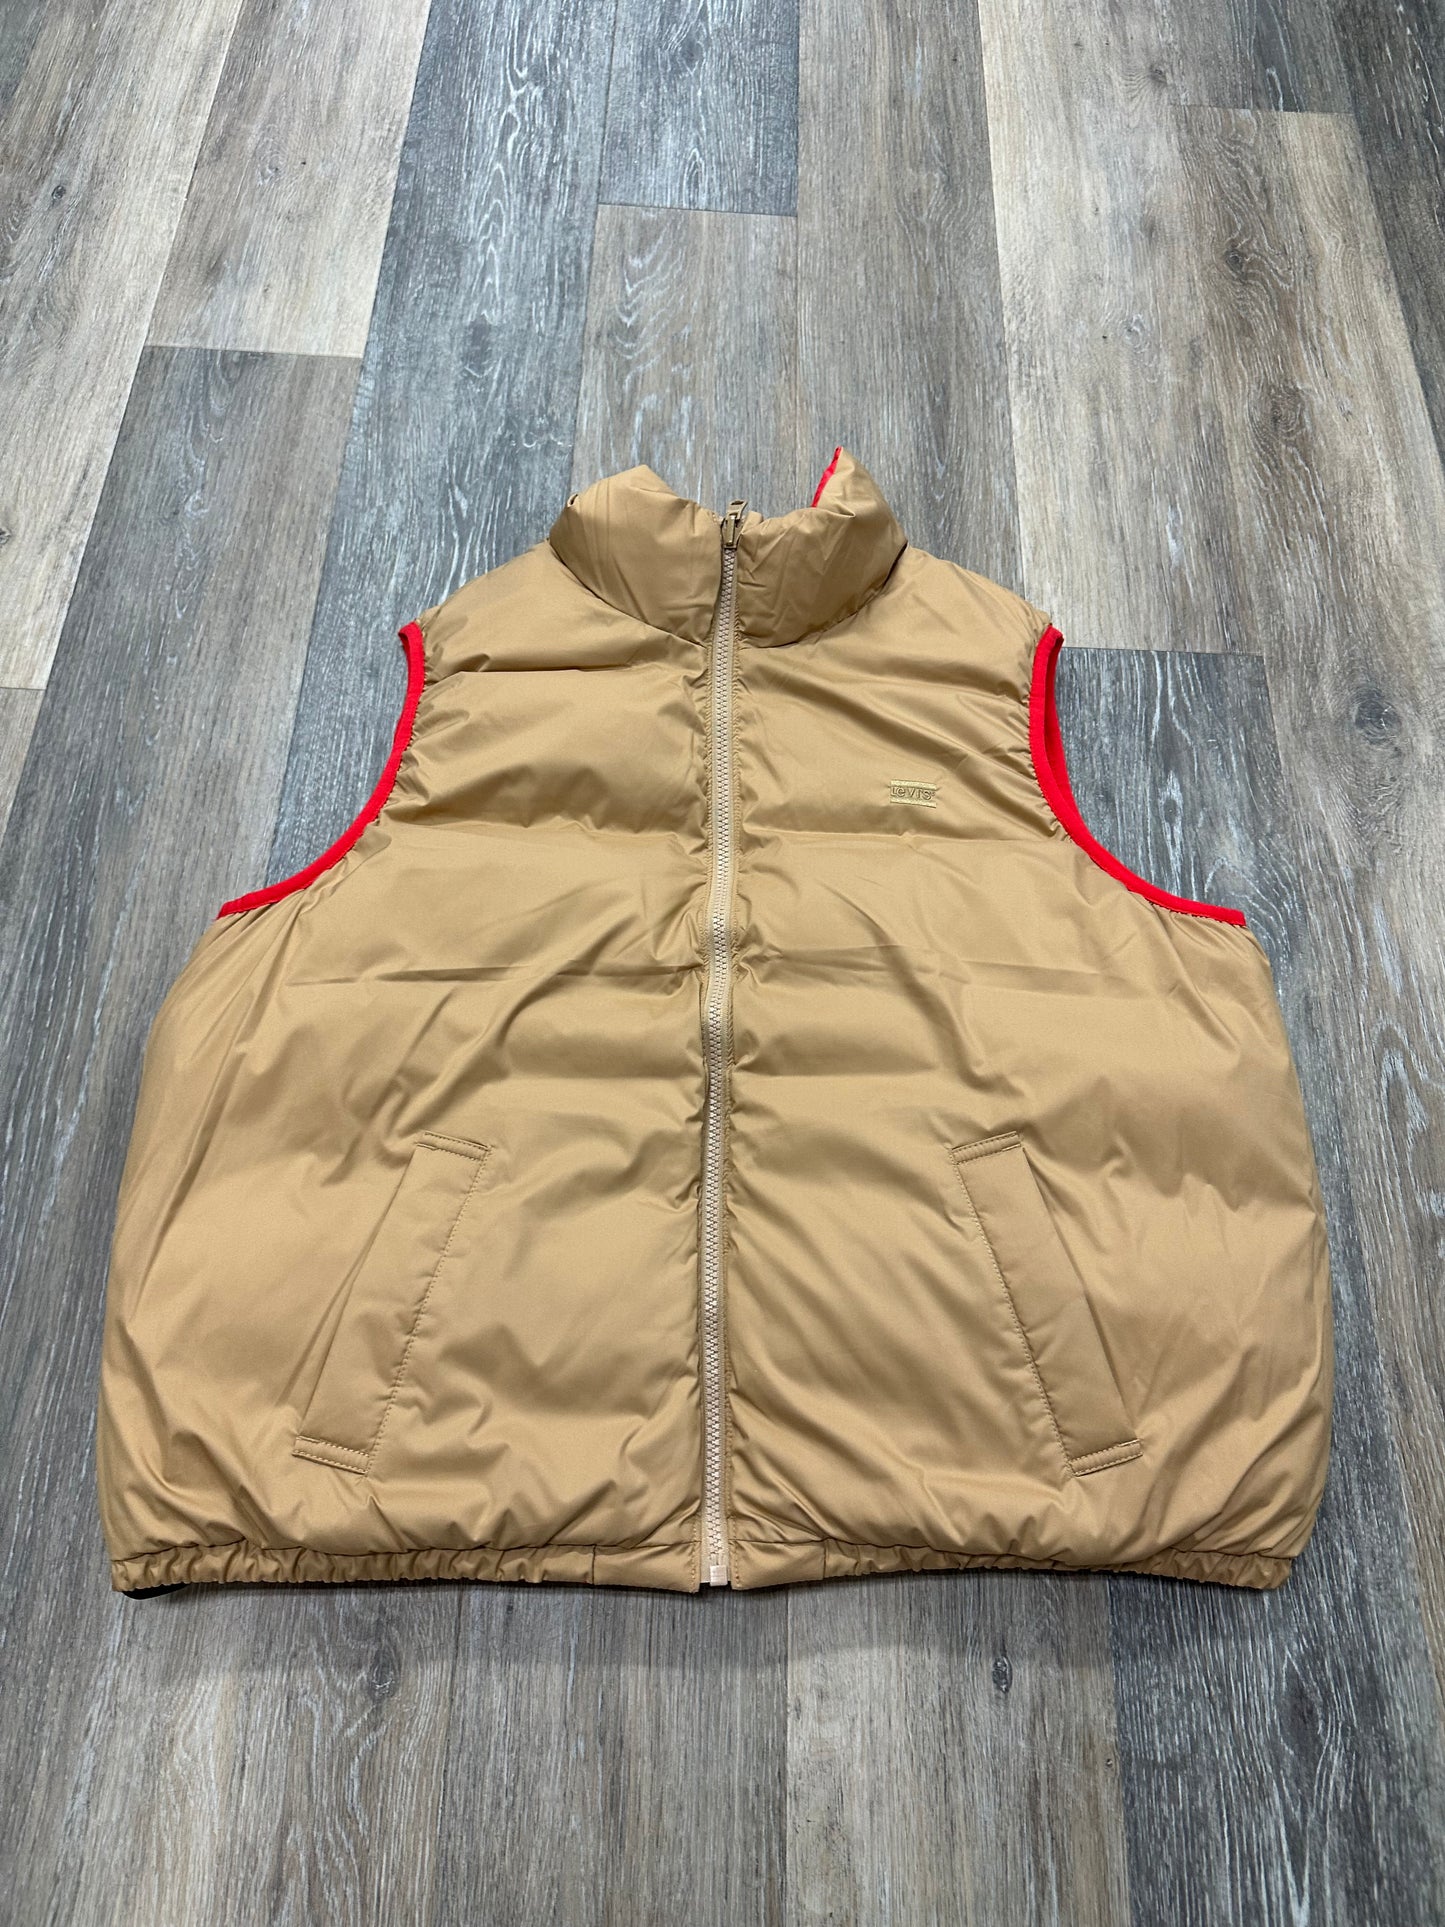 Vest Puffer & Quilted By Levis  Size: Xl